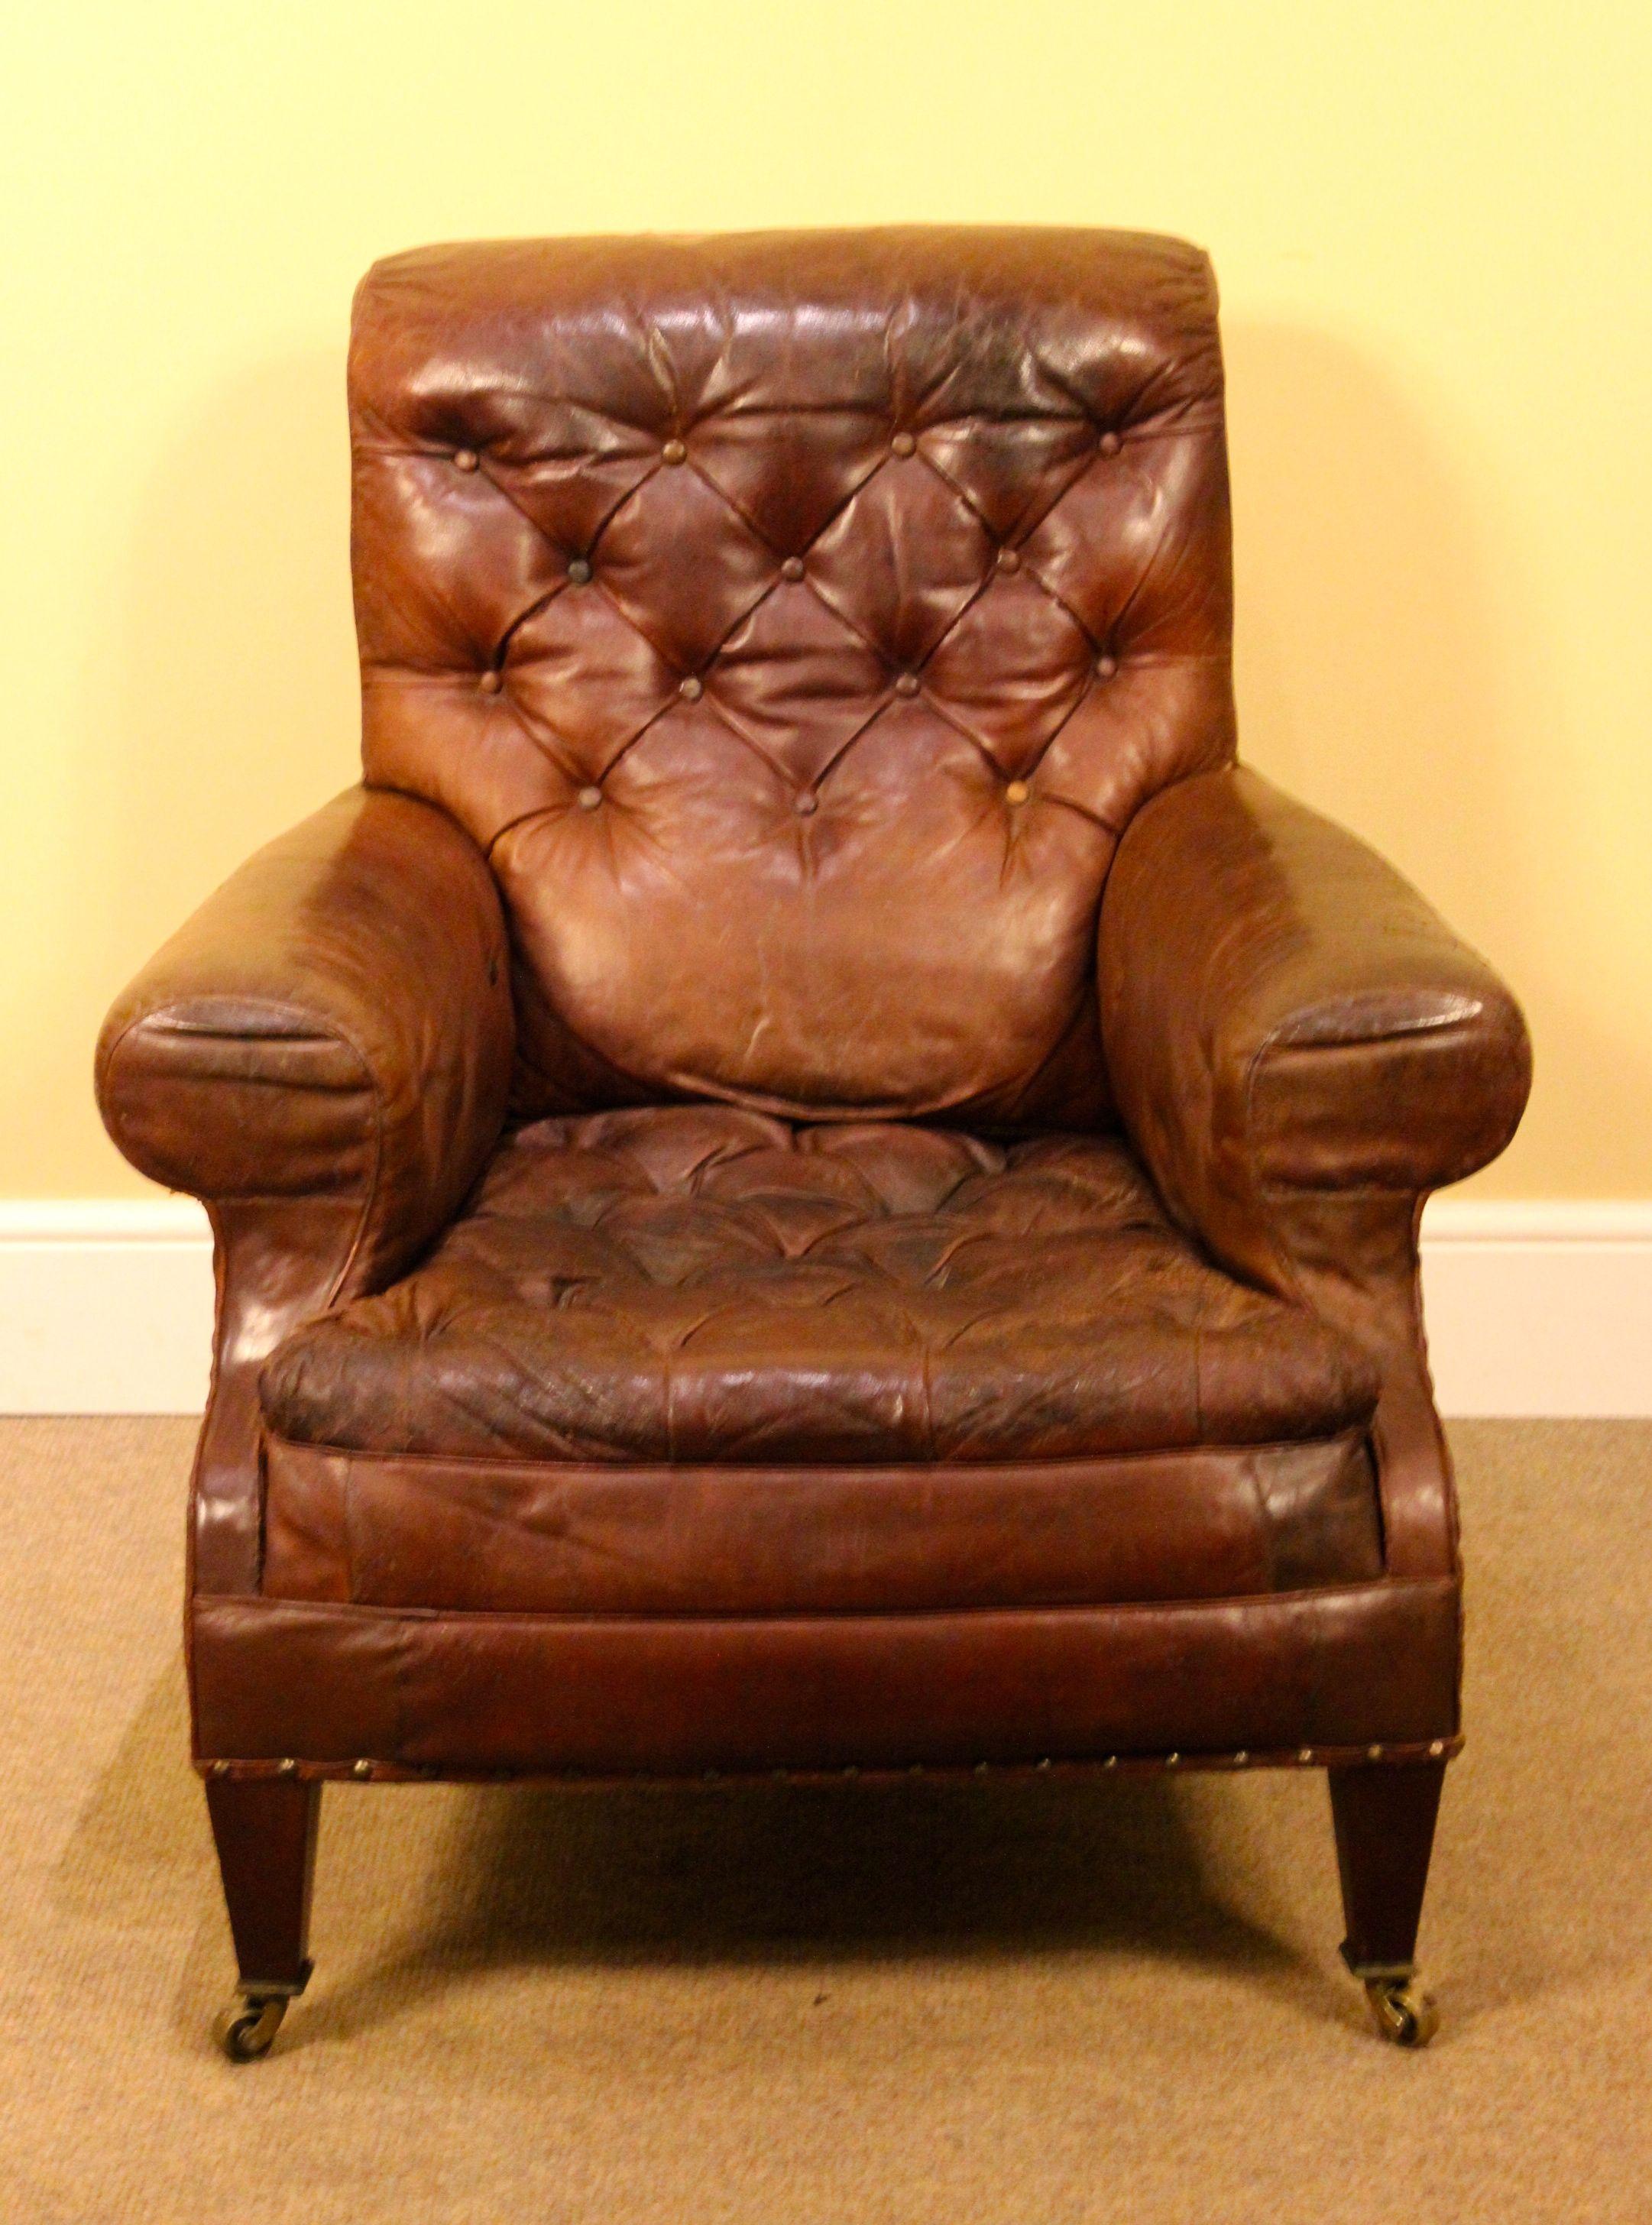 5804
Large 19thc. button back leather armchair
On square tapered legs with brass
Collars & castors. Stamped back legs. c.1890.
Measures: 34”W x 36”H x 34”D
87cm W x 82cm H x 87cm D.

Items can be delivered by independent carrier but please